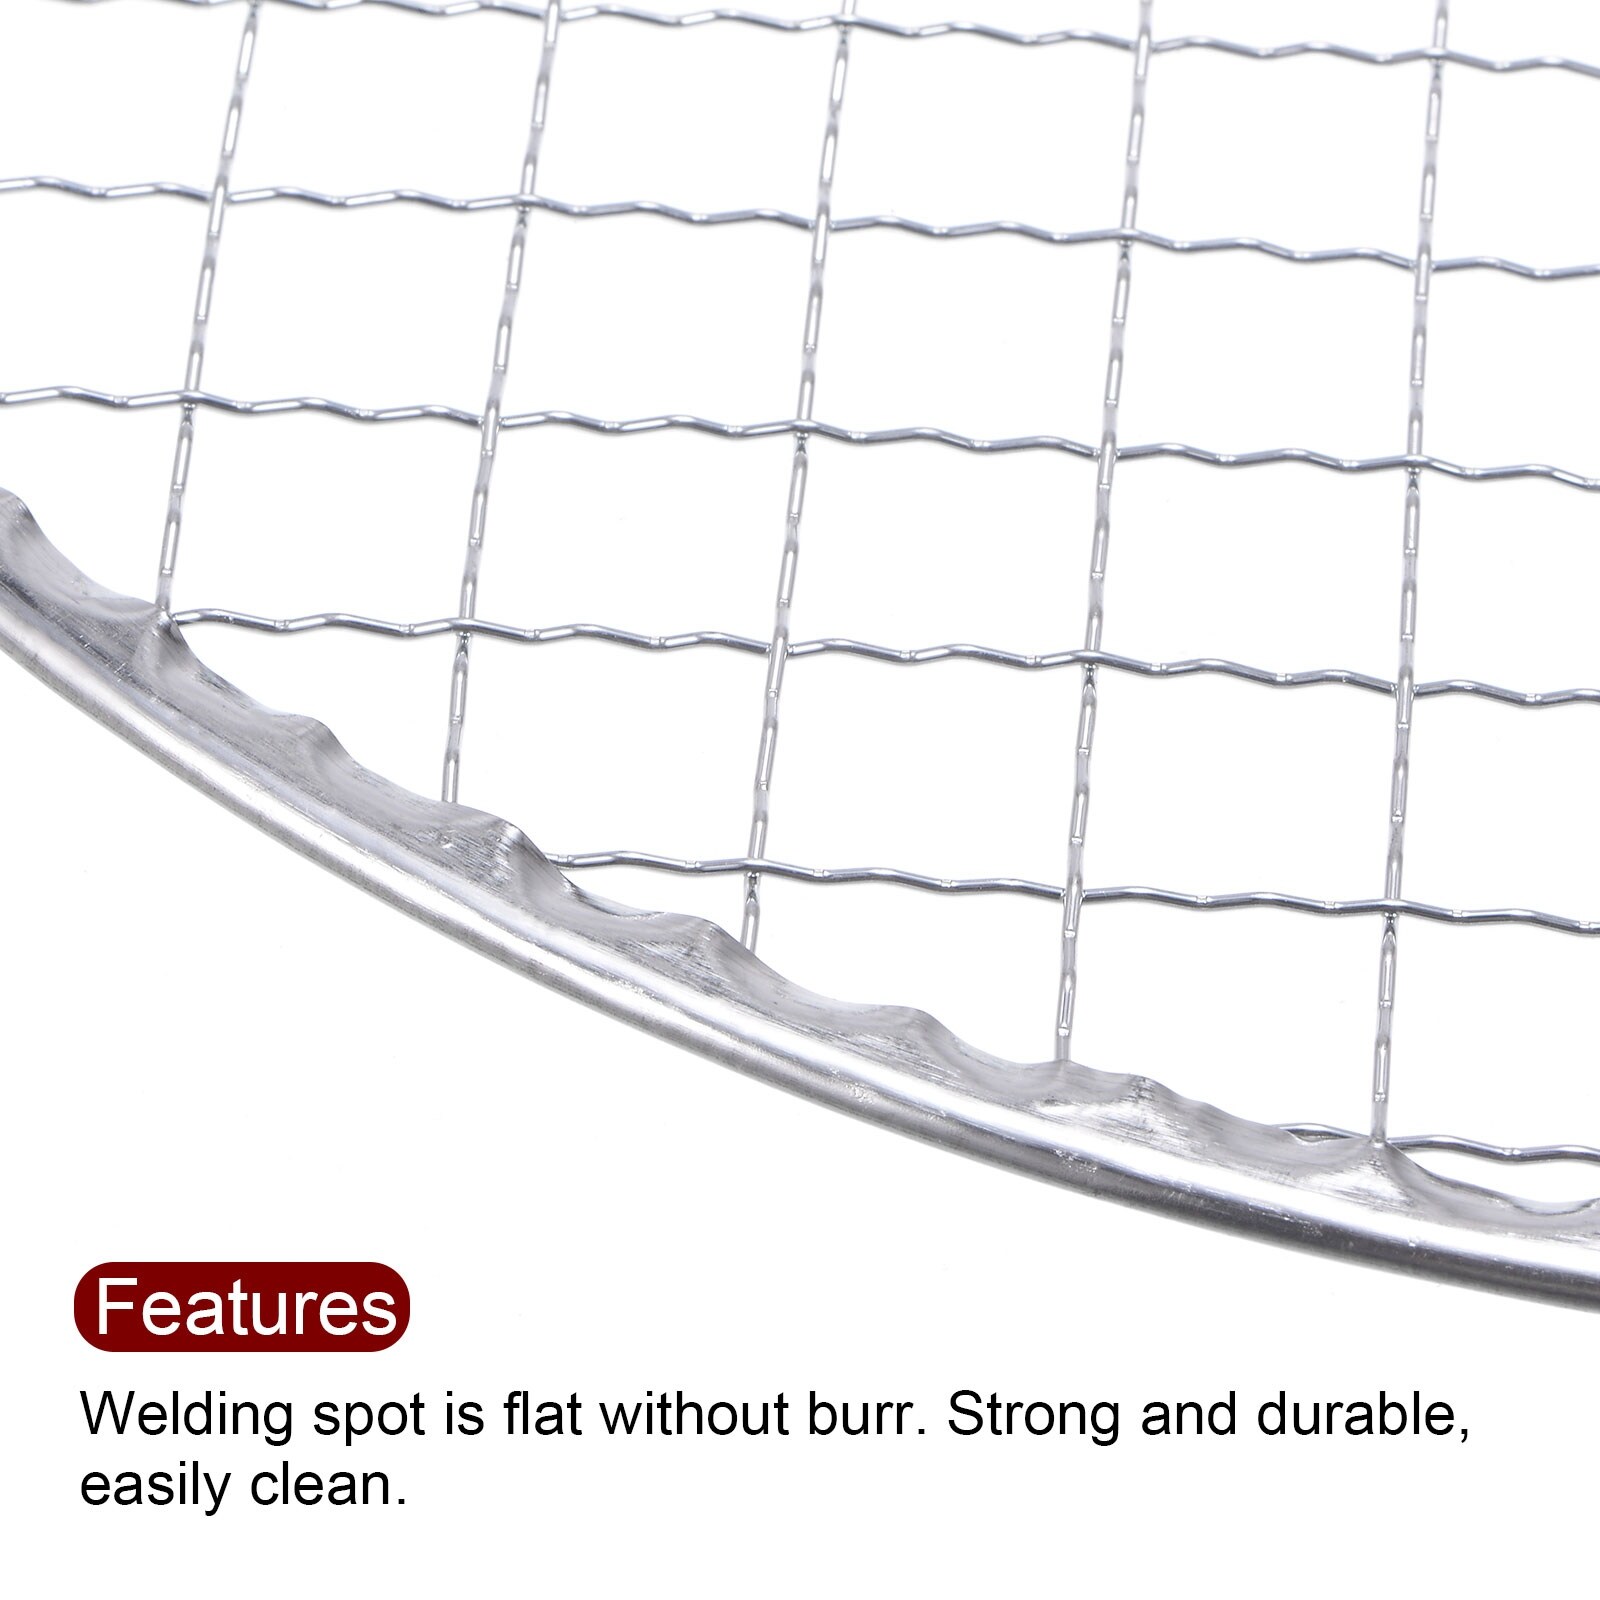 5pcs Round BBQ Grill Net 9.7" Dia Galvanized Iron Barbecue Mesh Mat for Baking